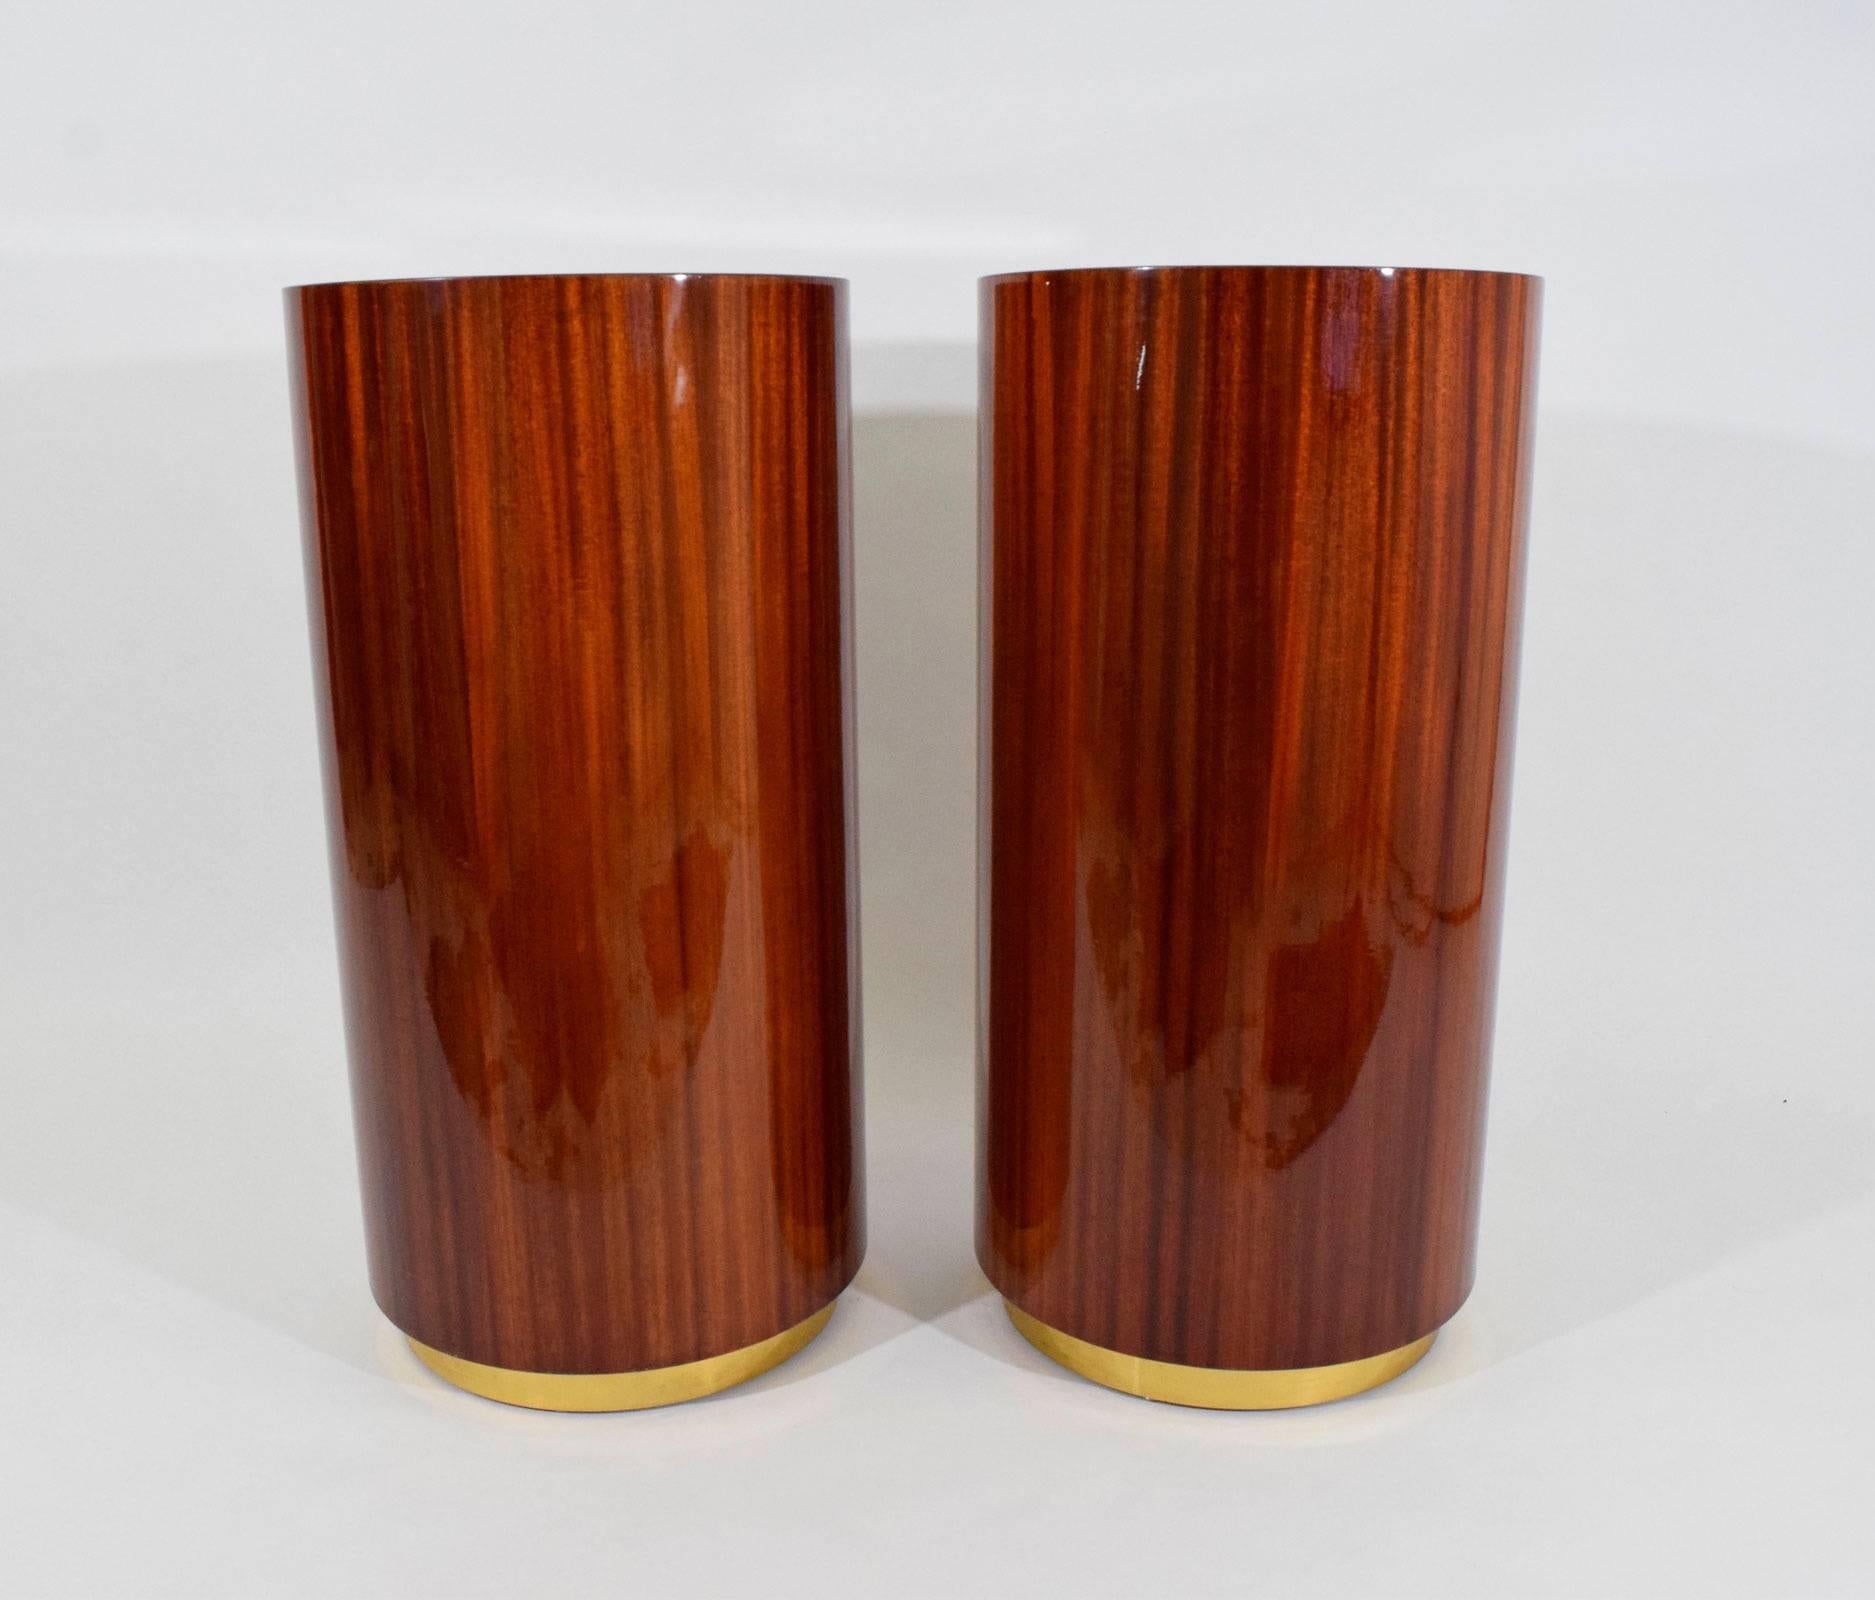 High gloss lacquer on rosewood bases with brass trim on slightly recessed bottom. These can be used as pedestals or as bases to a console. They can also be cut down and used as dining or desk table bases.